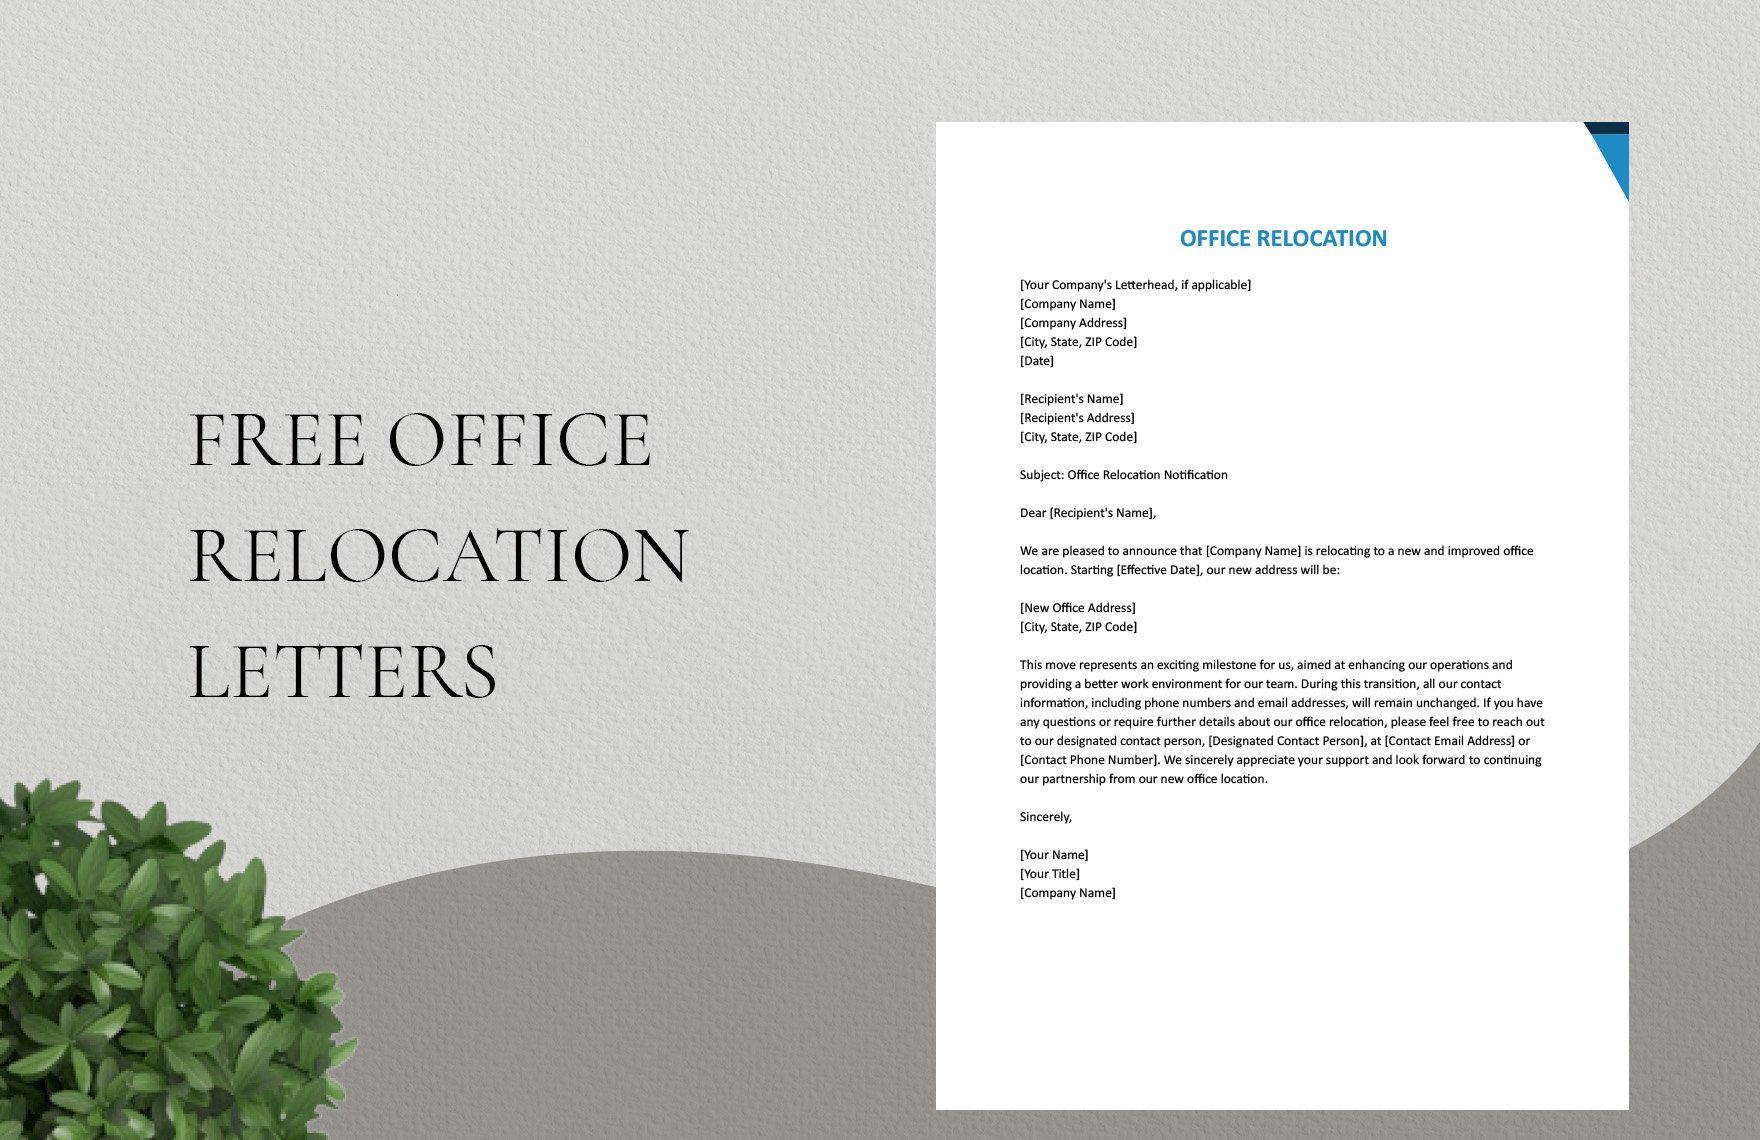 Office Relocation Letters